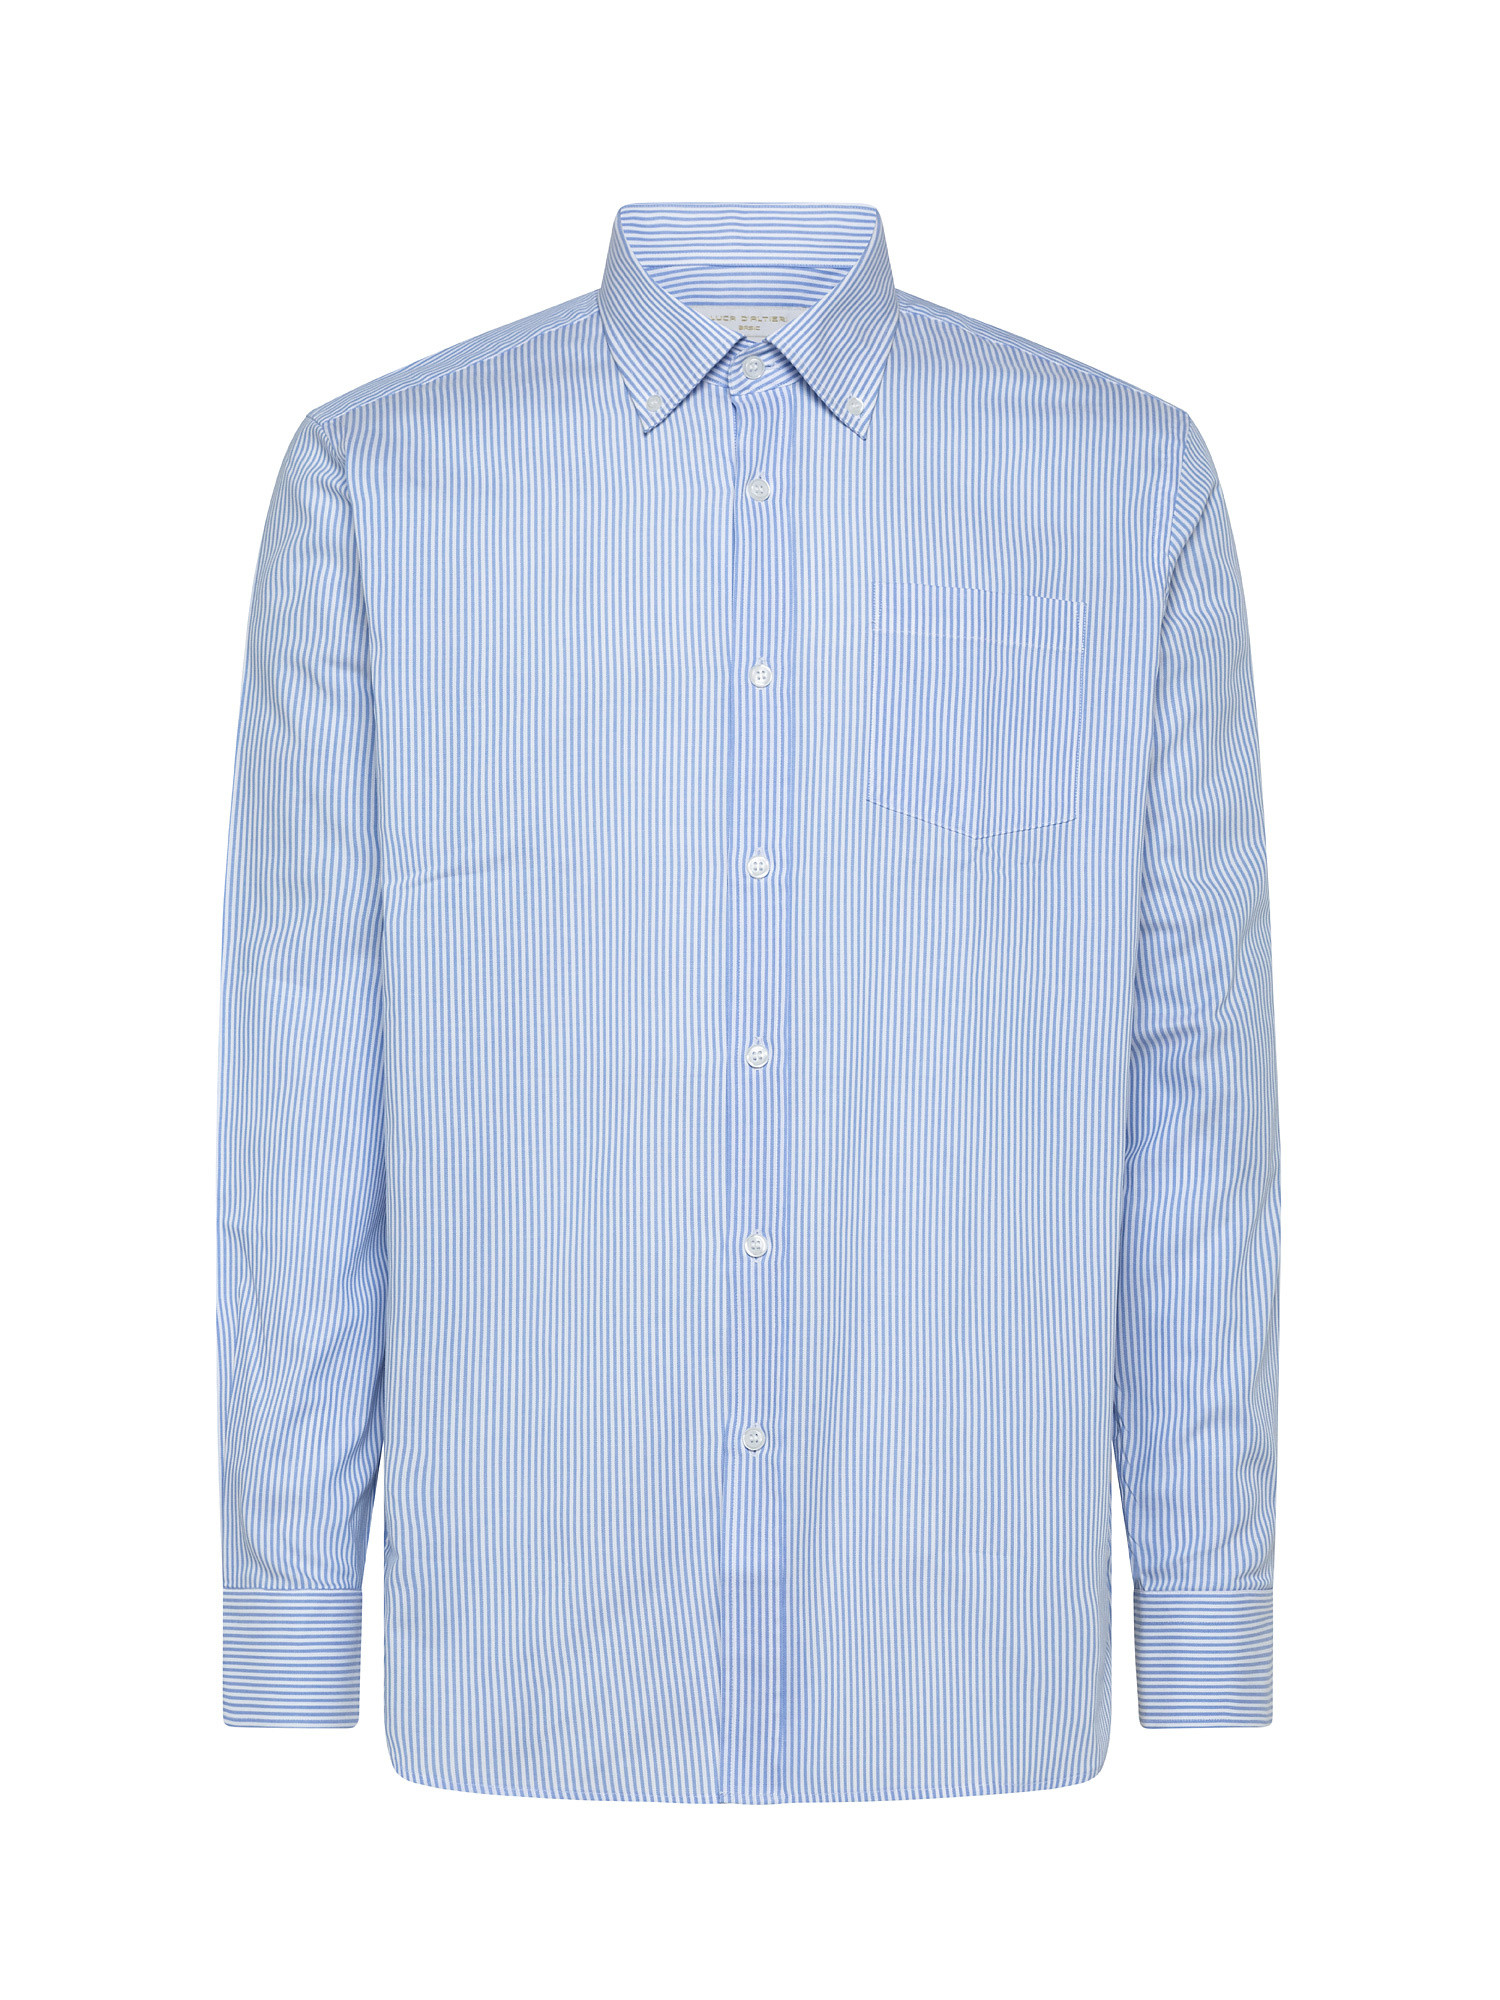 Camicia tailor fit in cotone oxford, Azzurro, large image number 0